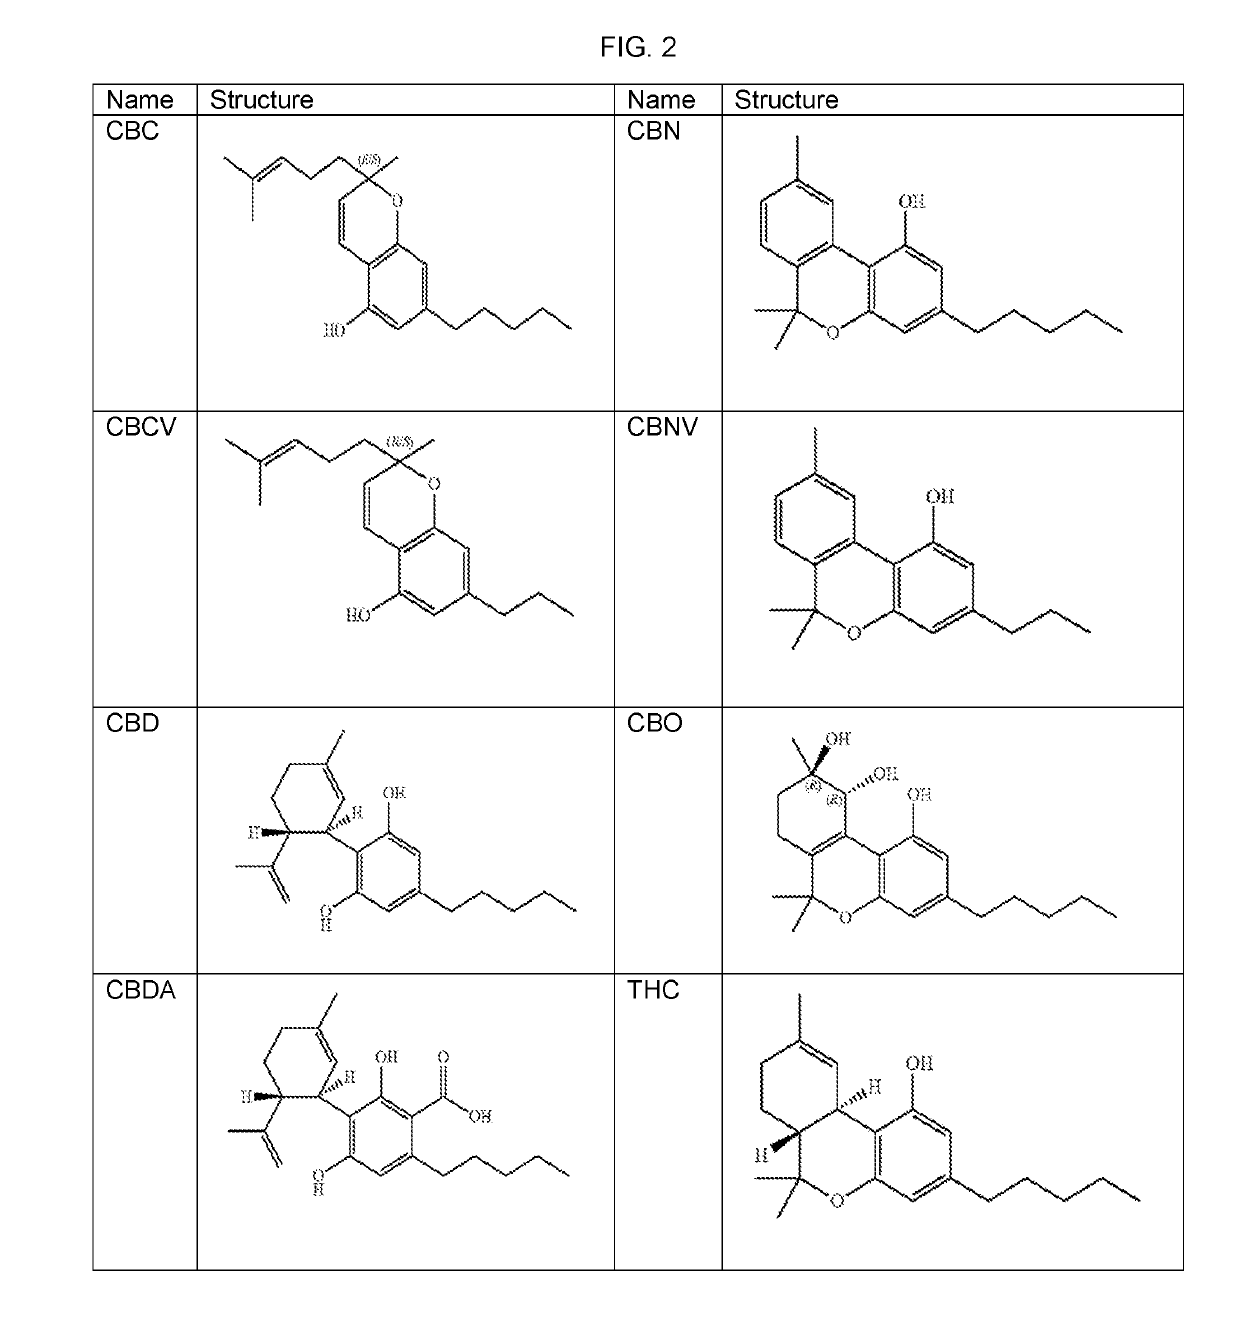 Fast-acting plant-based medicinal compounds and nutritional supplements